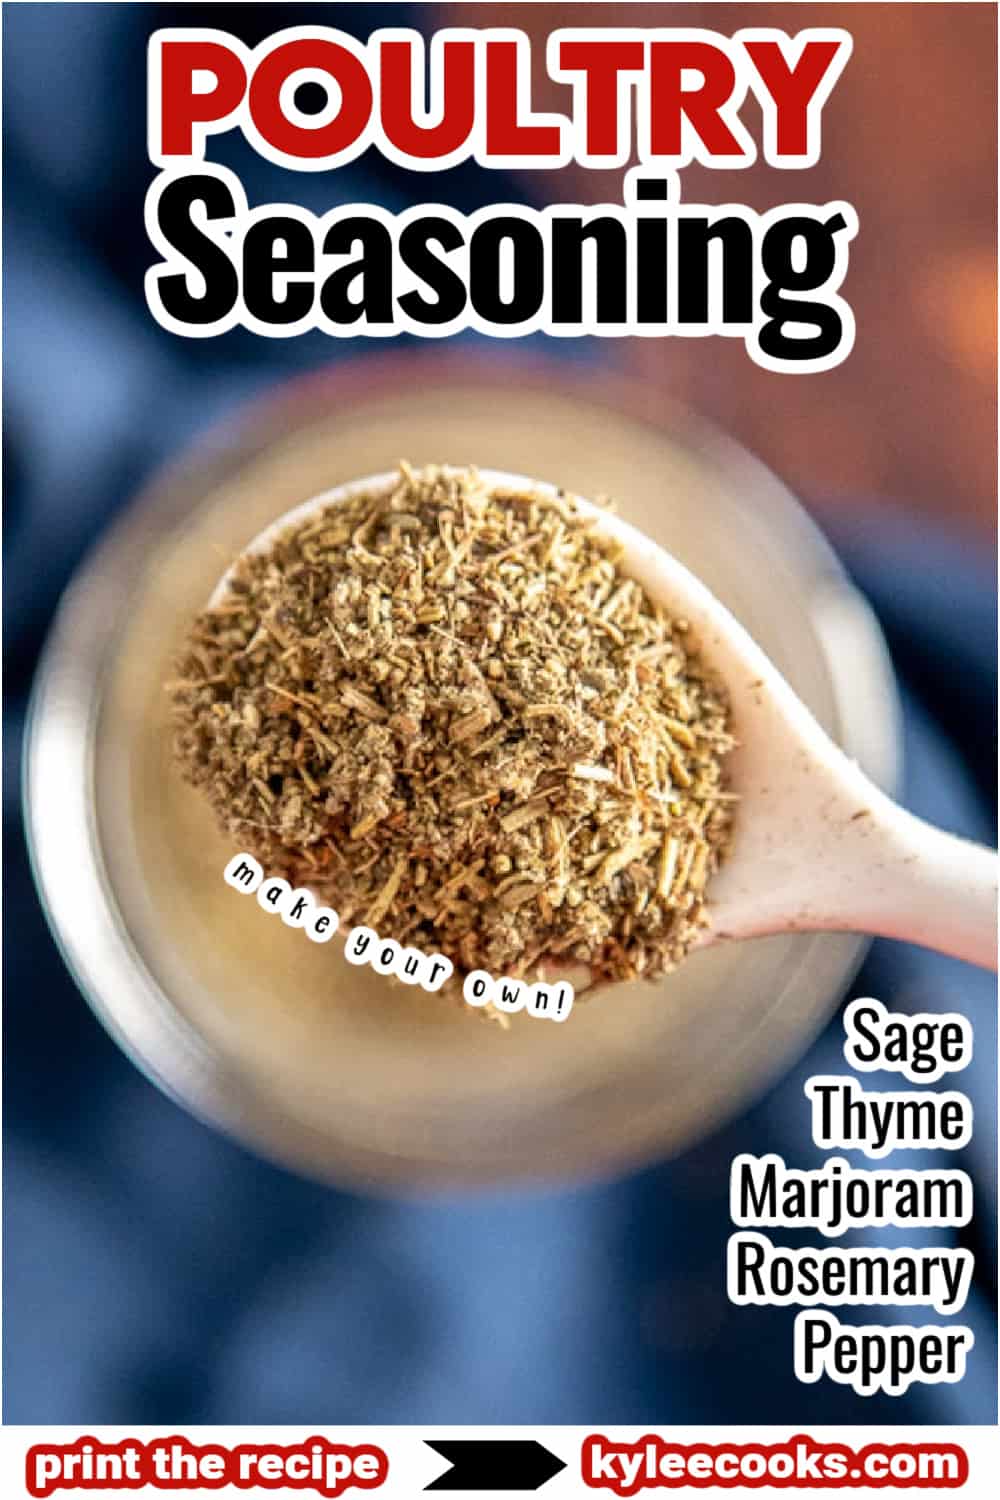 Poultry Seasoning with recipe name overlaid in text.